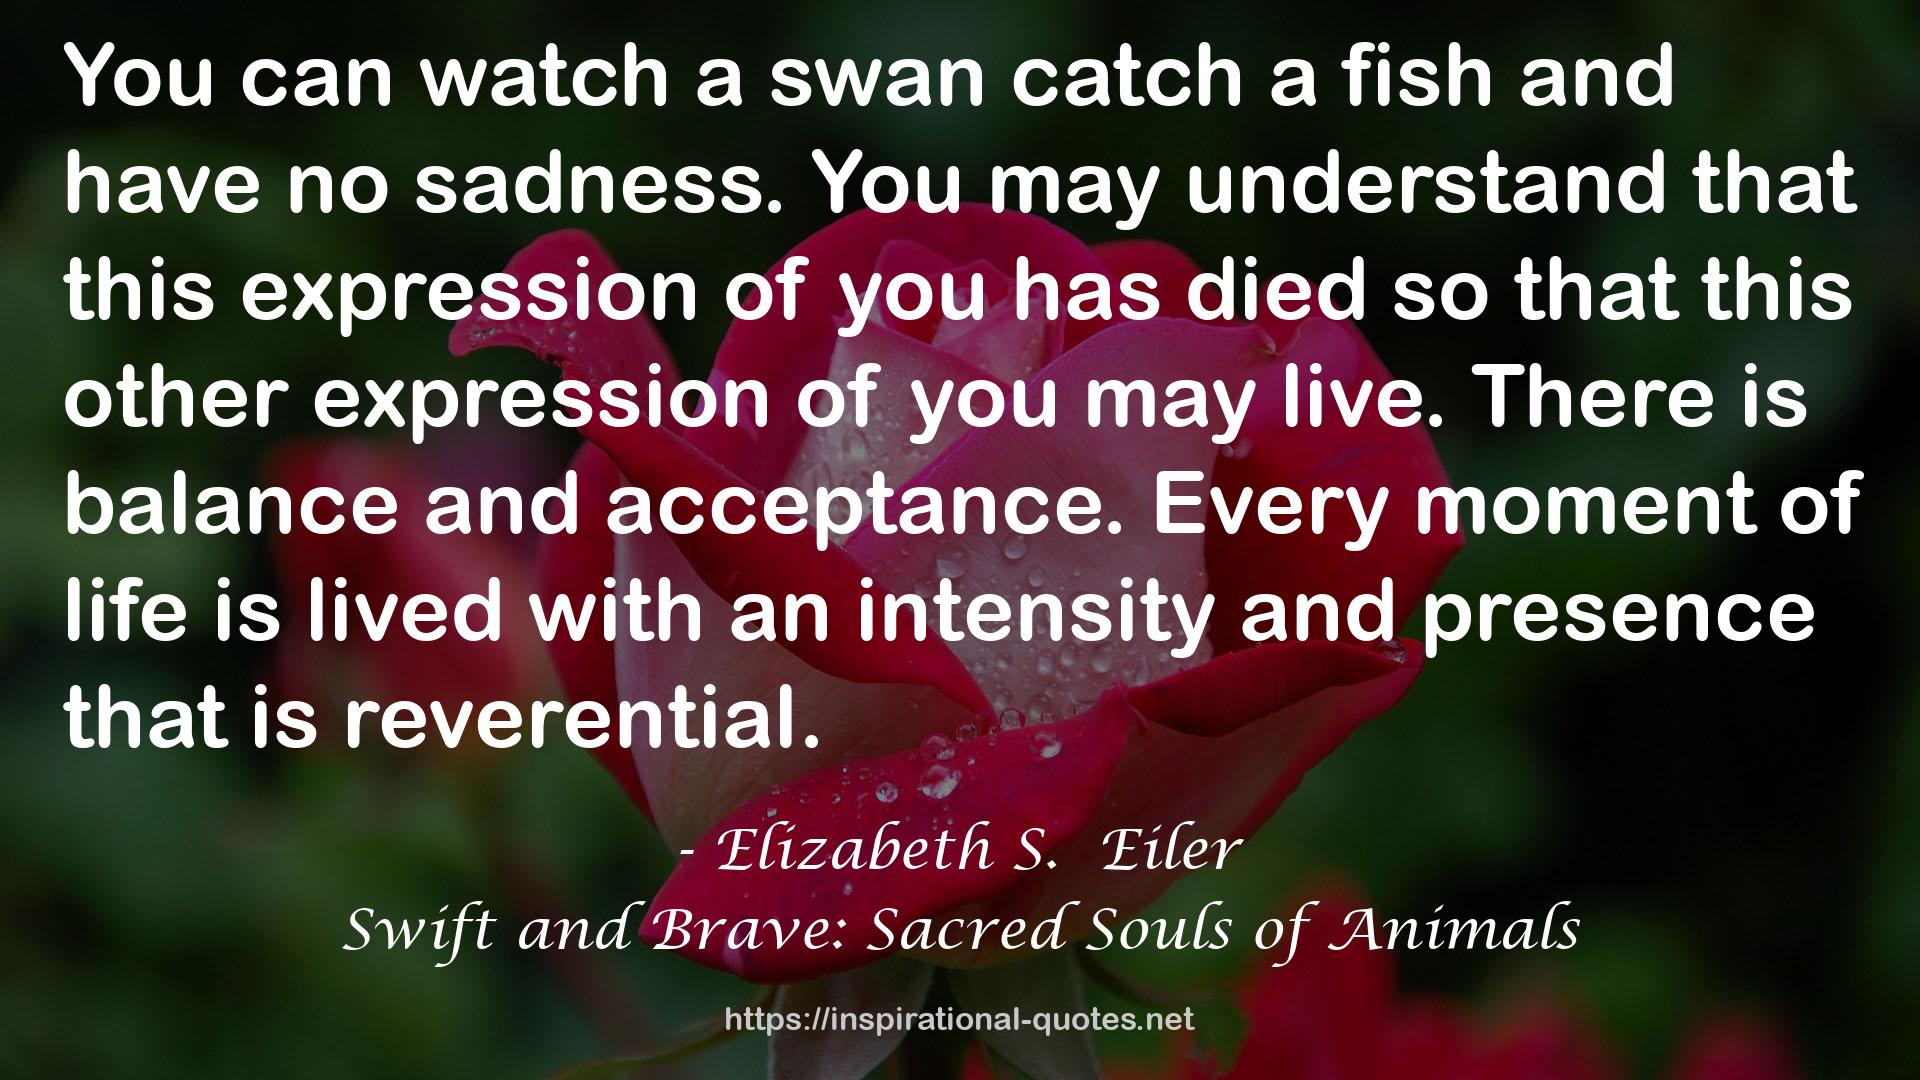 Swift and Brave: Sacred Souls of Animals QUOTES